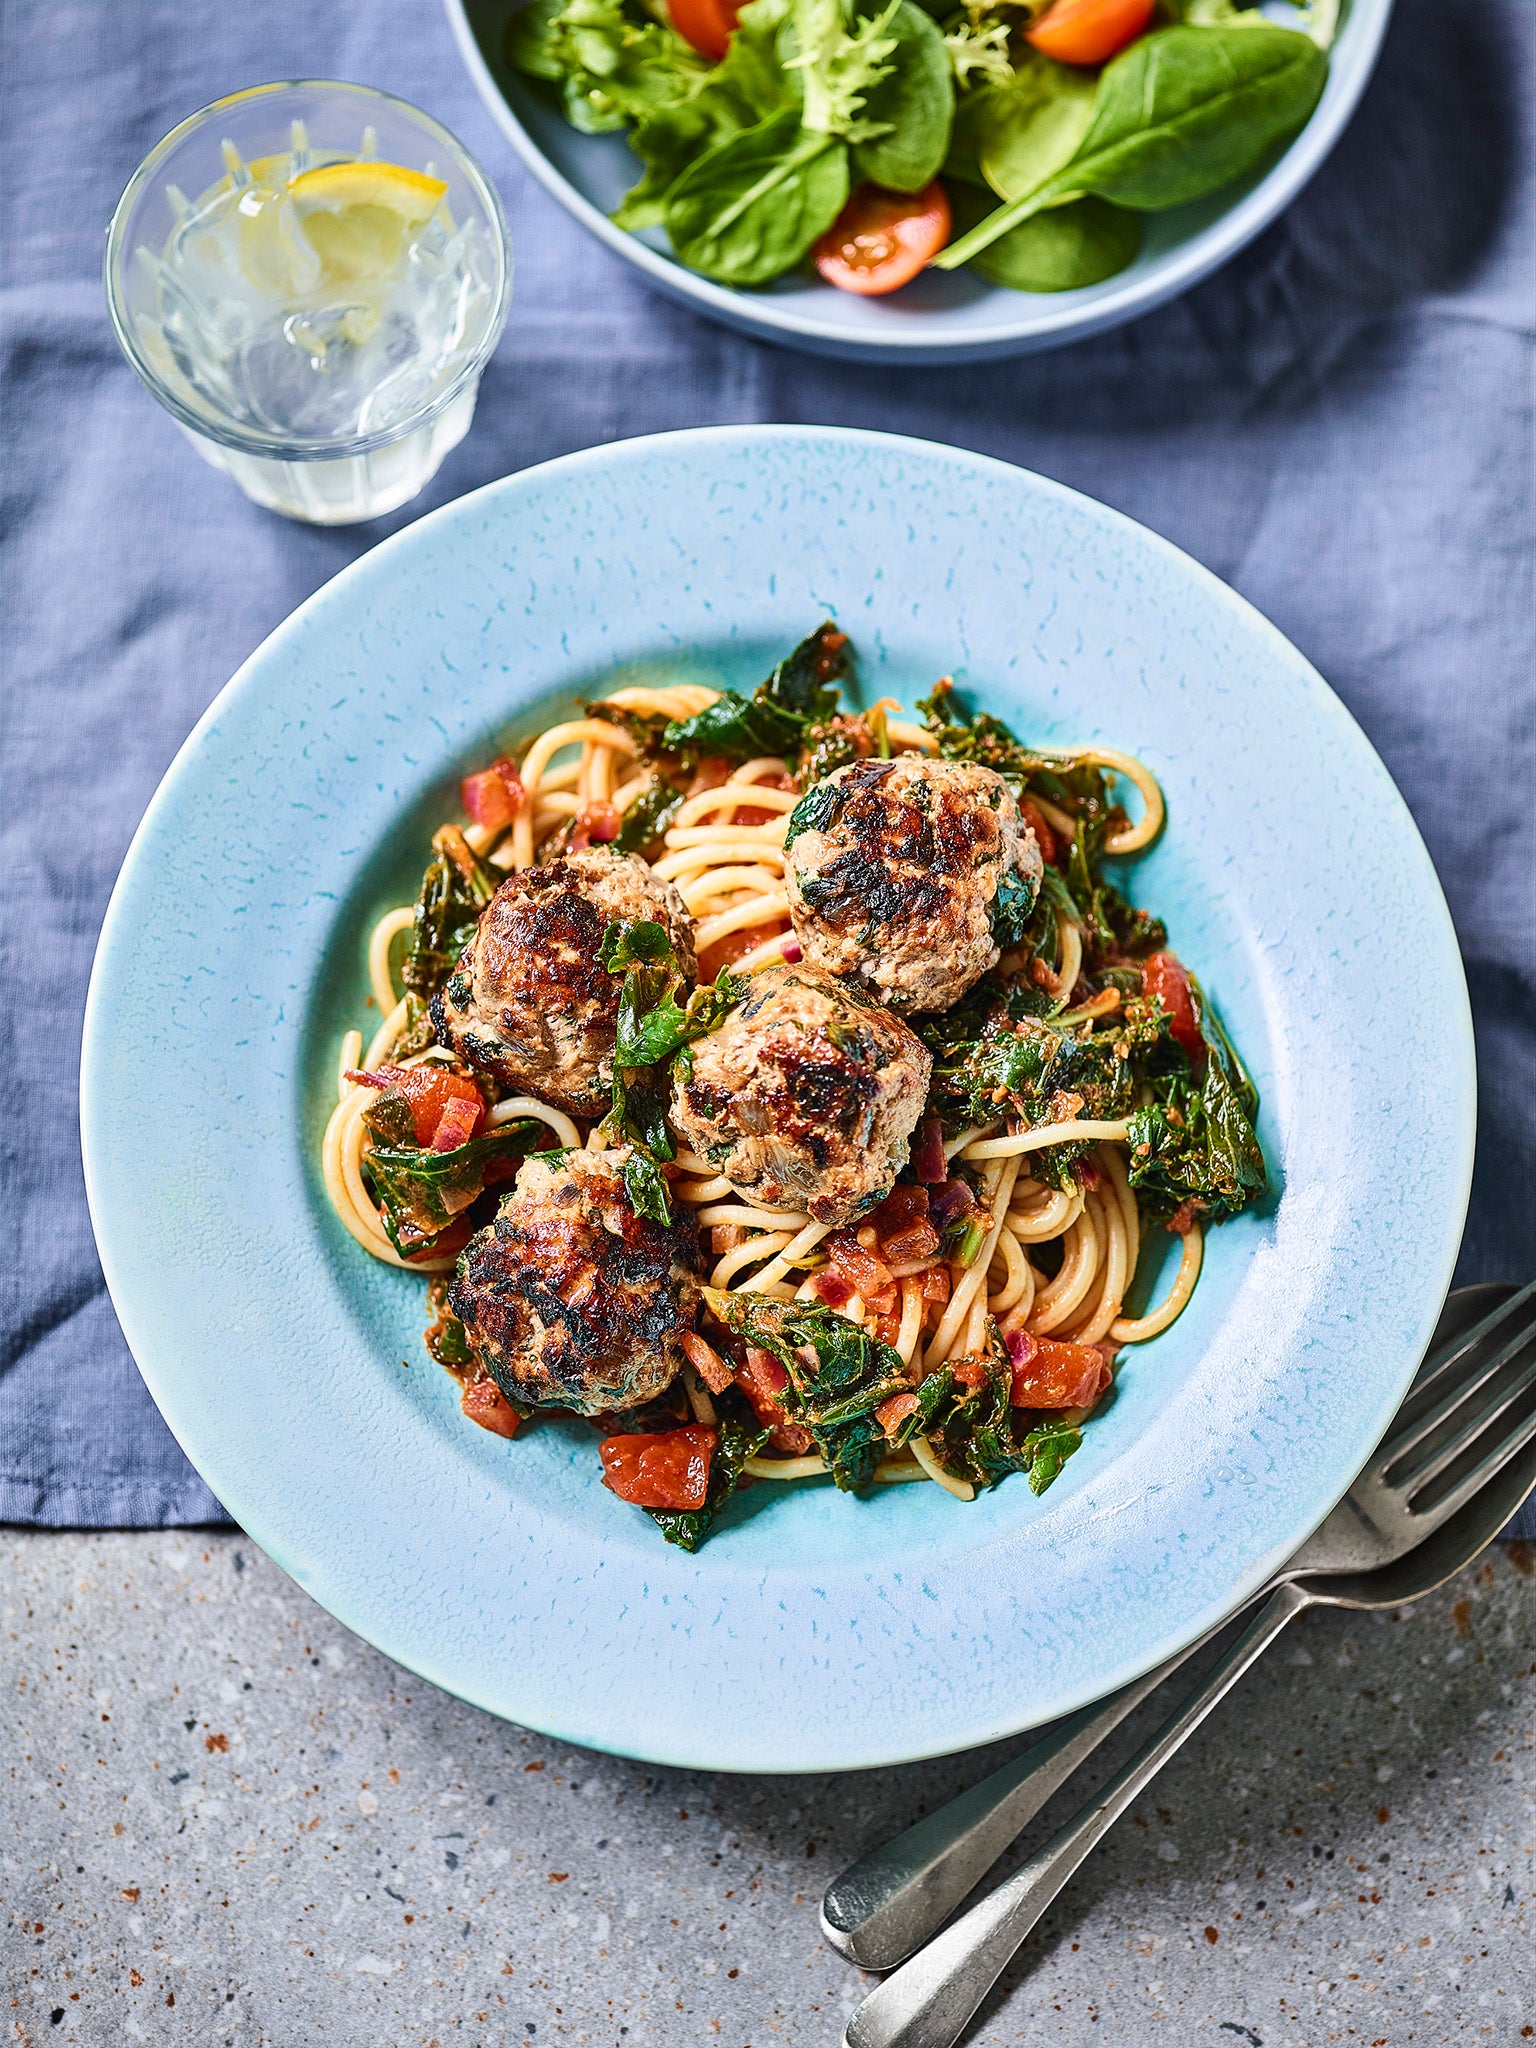 Introduce the kids to wonderfully leafy green kale in the family-friendlypork and kale meatballs with spaghetti